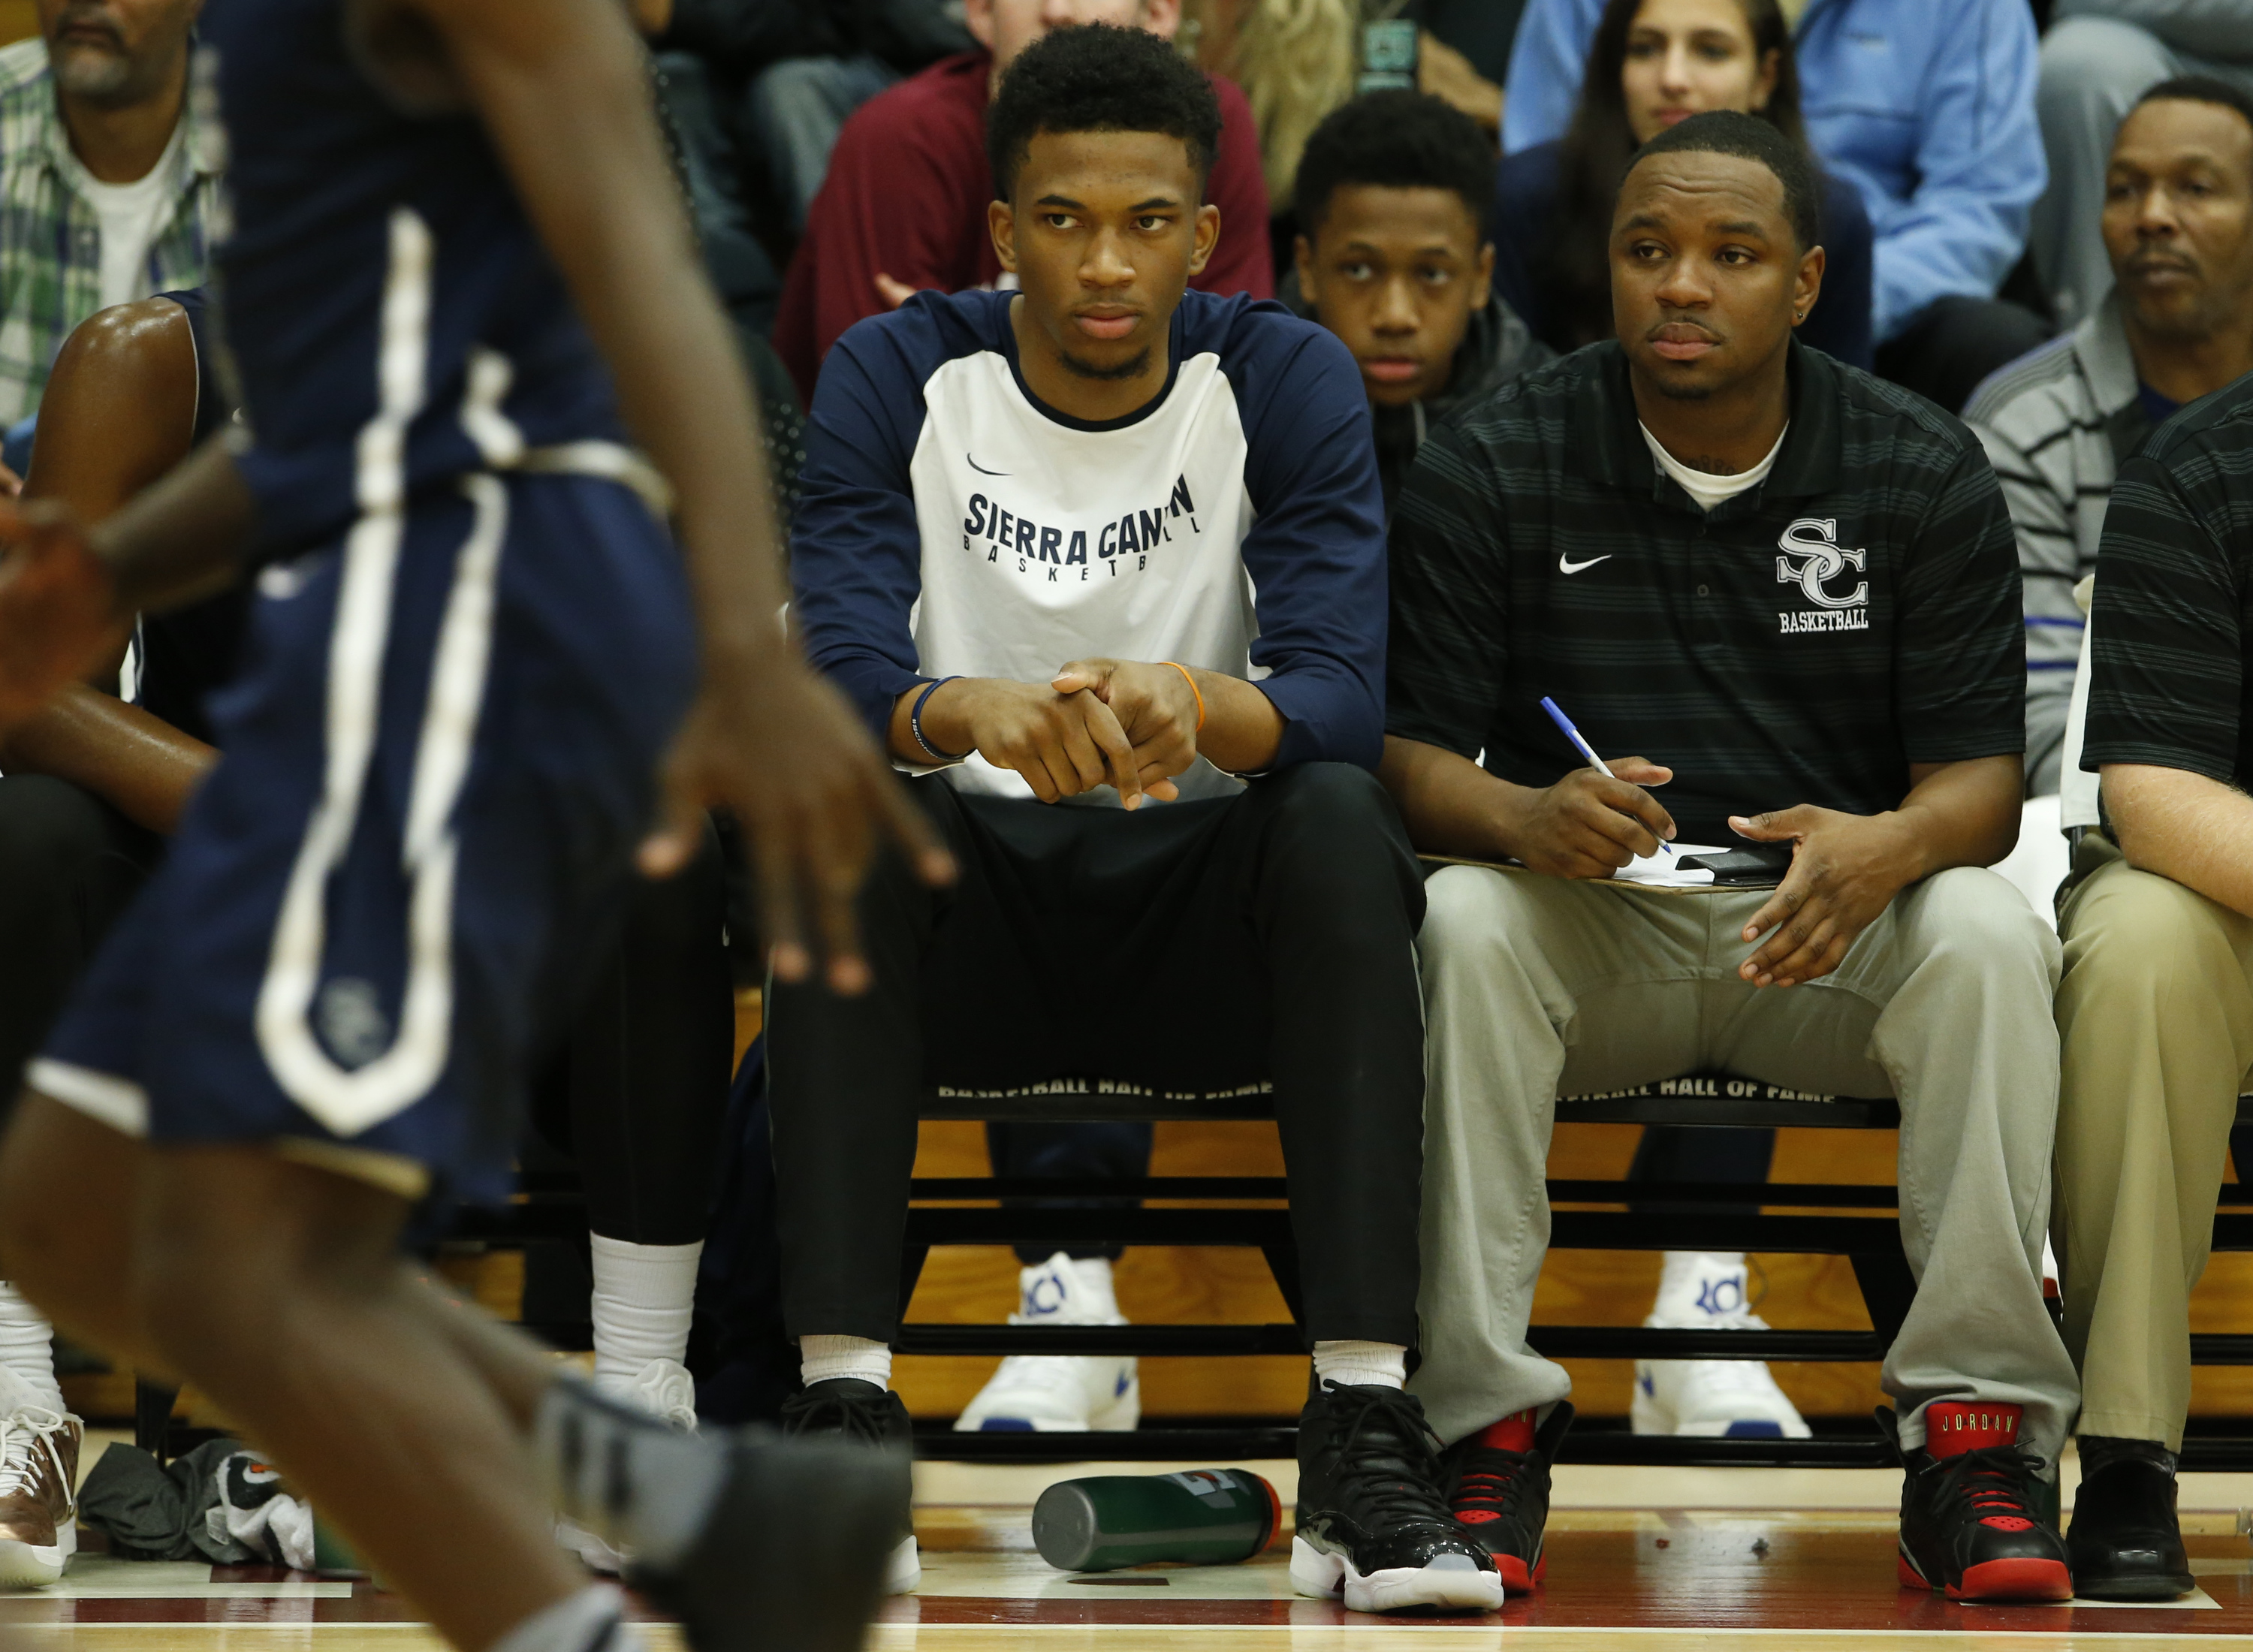 Sierra Canyon's Marvin Bagley (center) watches as the team competes at the Hoophall Classic. (Photo: David Butler II, USA TODAY Sports Images)